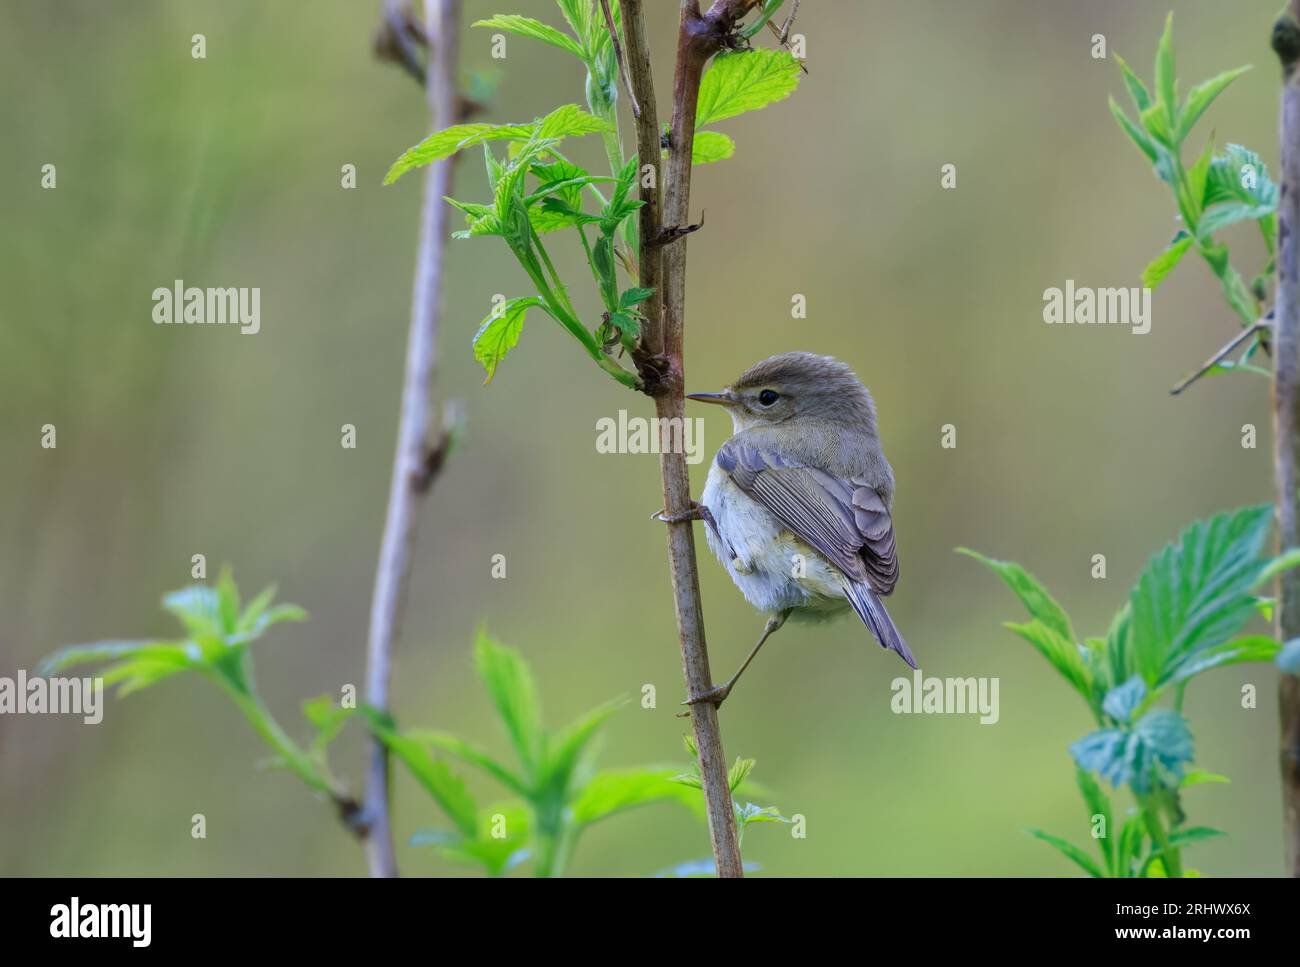 Common Chiffchaff(Phylloscopus collybita) looking back at camera sitting on raspberry stalk, Bialowieza Forest, Poland, Europe Stock Photo